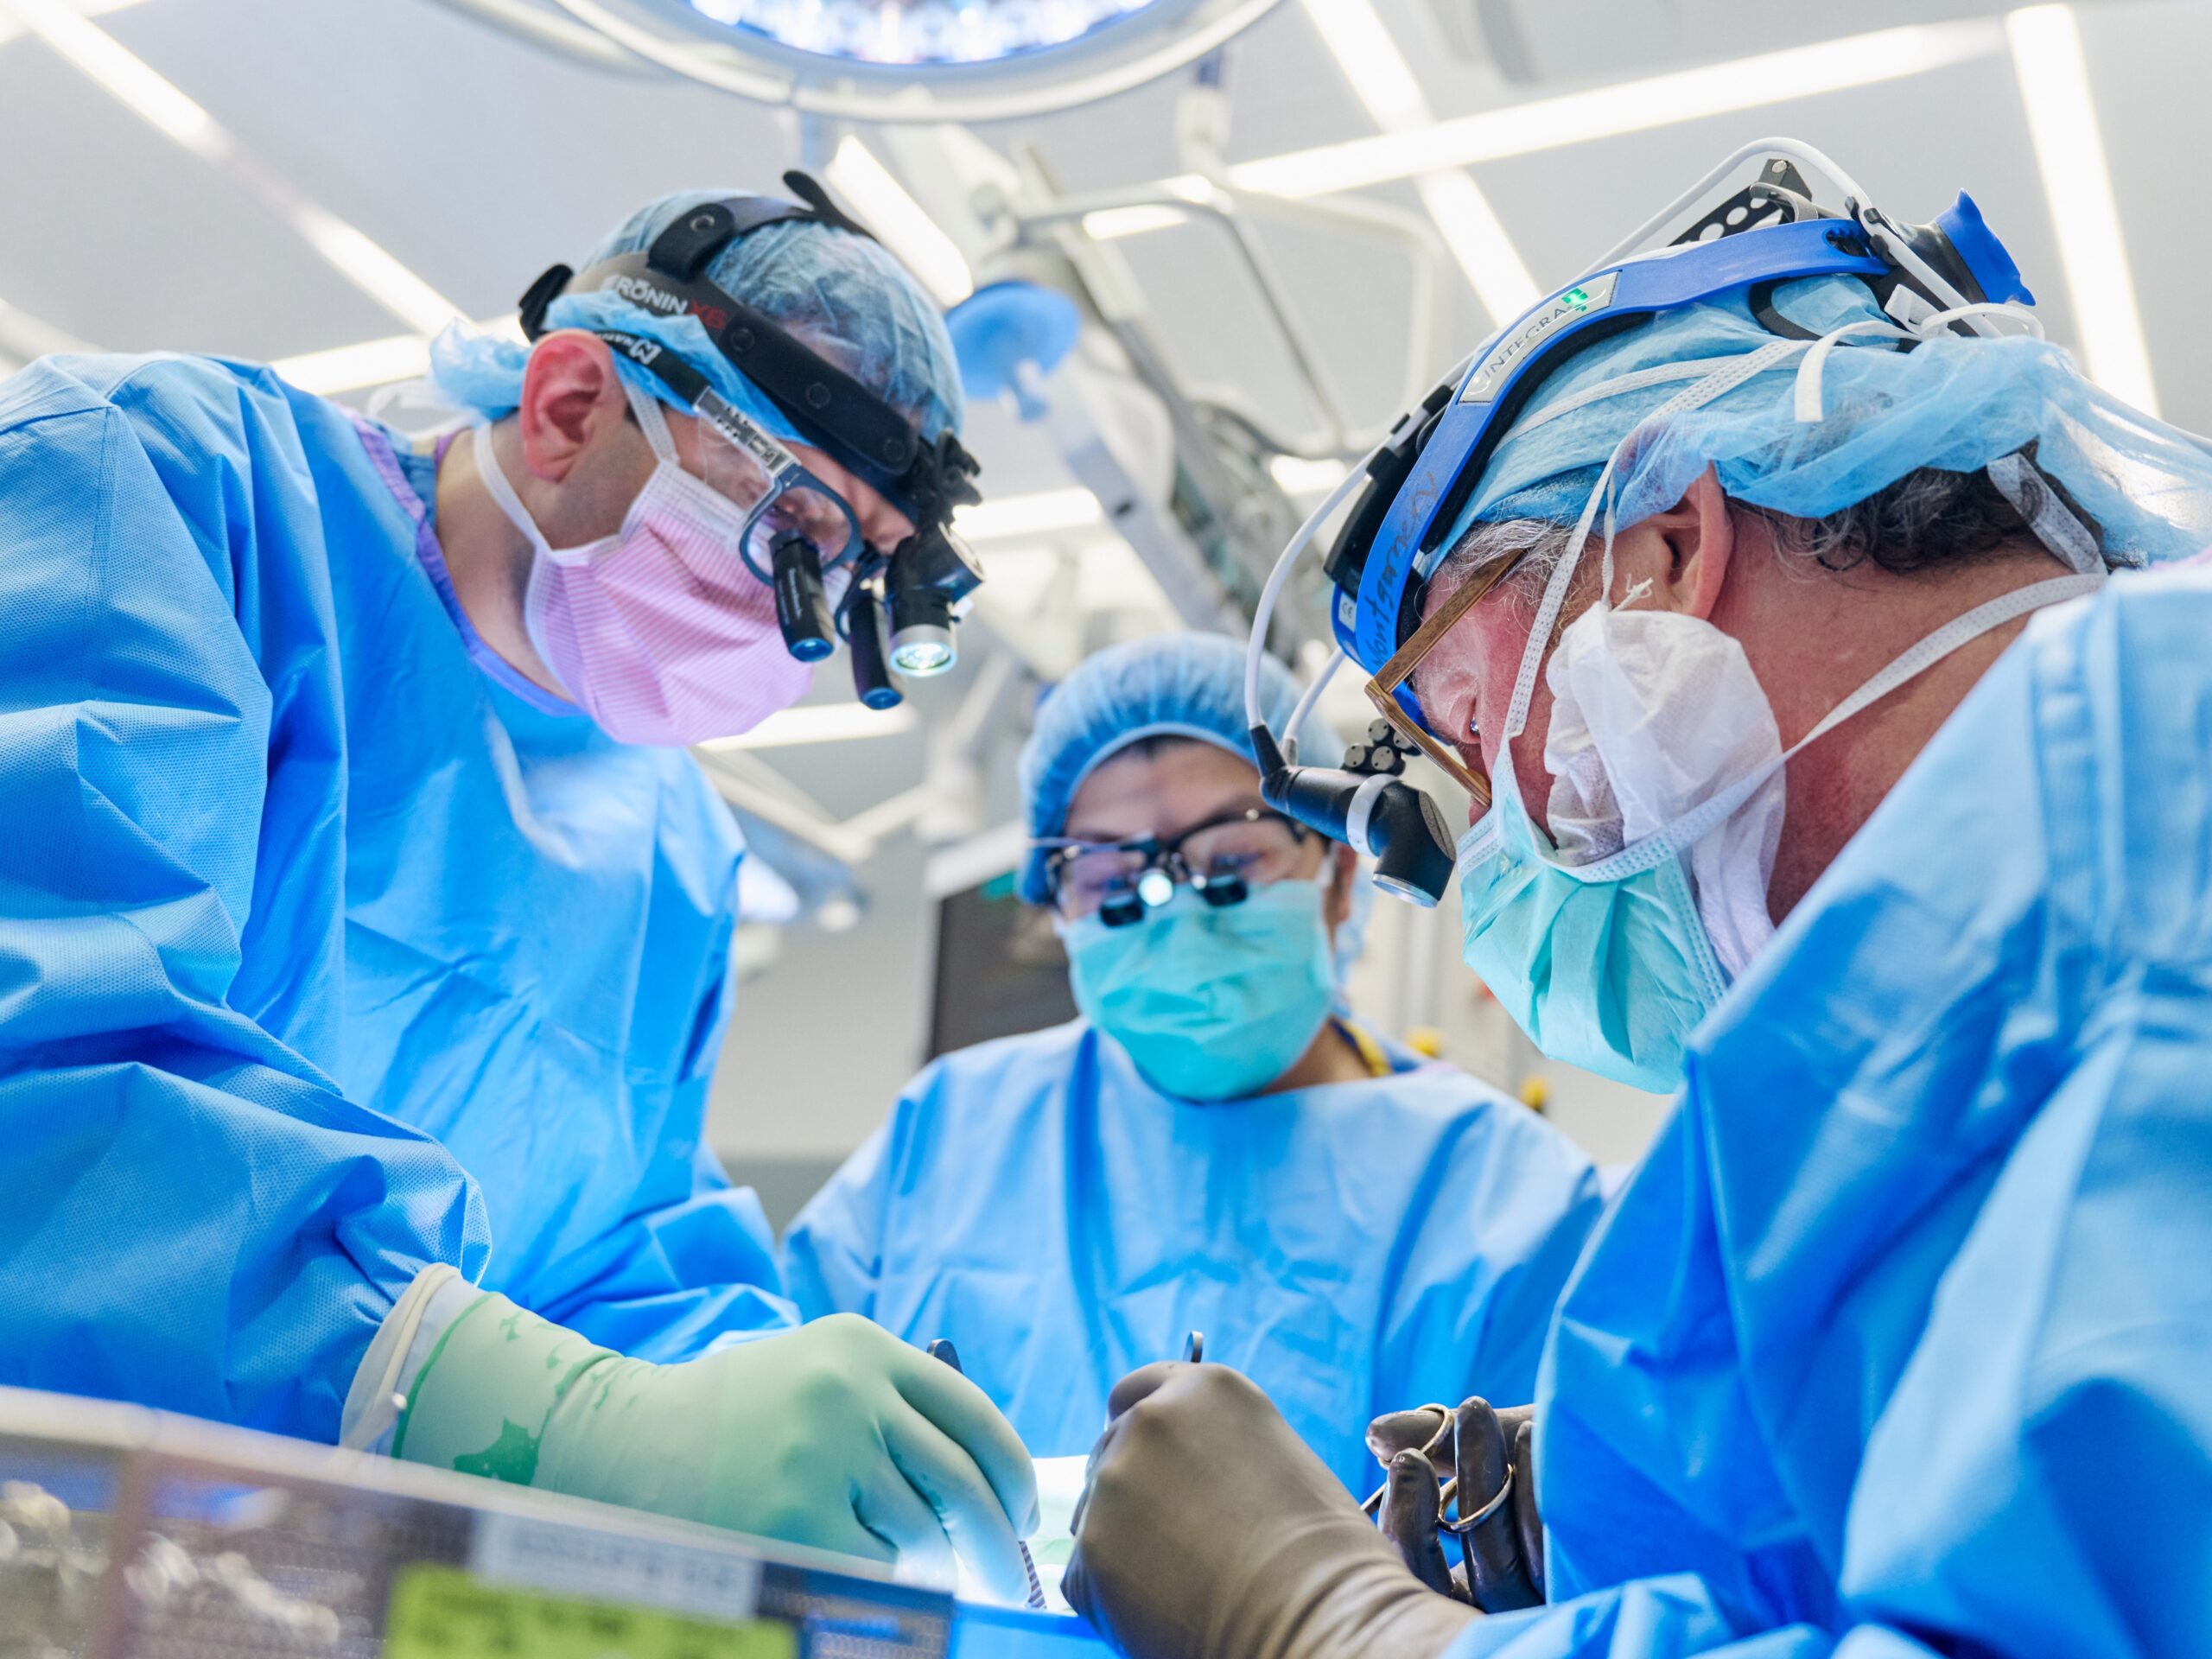 Dr. Jeffrey Stern, assistant professor in the Department of Surgery at NYU Grossman School of Medicine, and Dr. Robert Montgomery, director of the NYU Langone Transplant Institute, prepare the gene-edited pig kidney with thymus for transplantation.